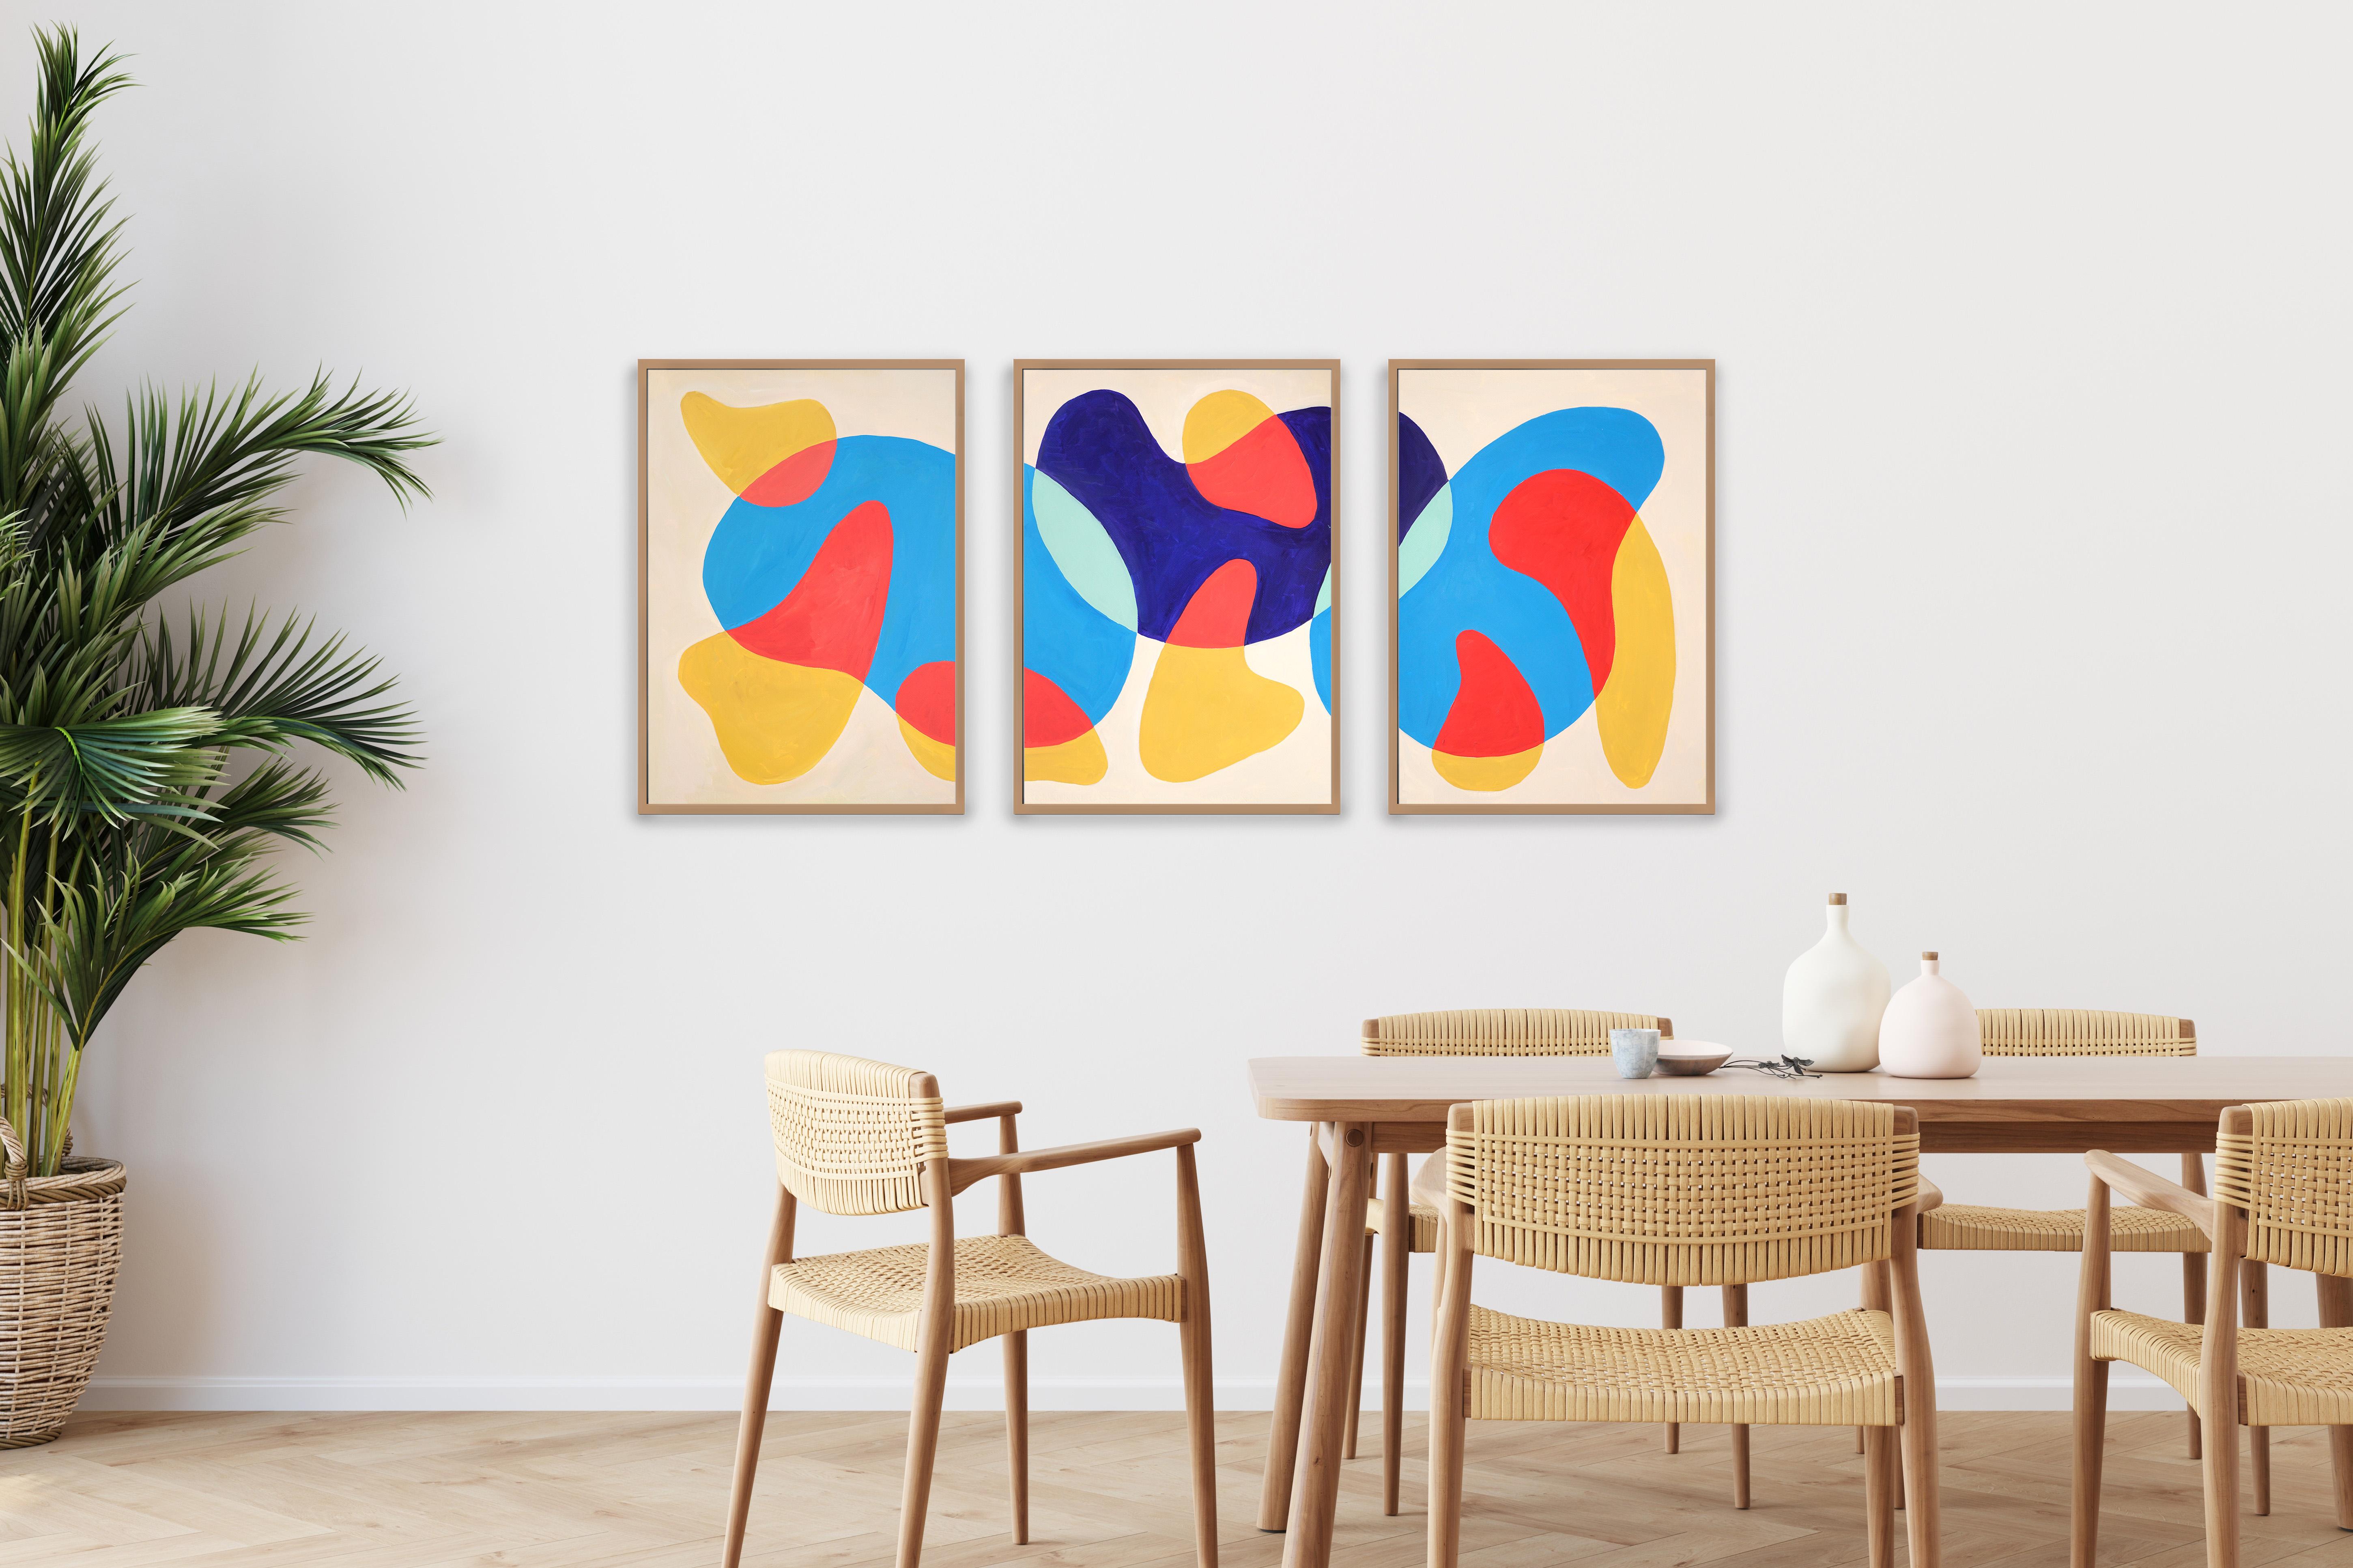 Swimming Pools in The Desert, Abstract Modern Shapes in Primary Tones, Triptych - Painting by Ryan Rivadeneyra